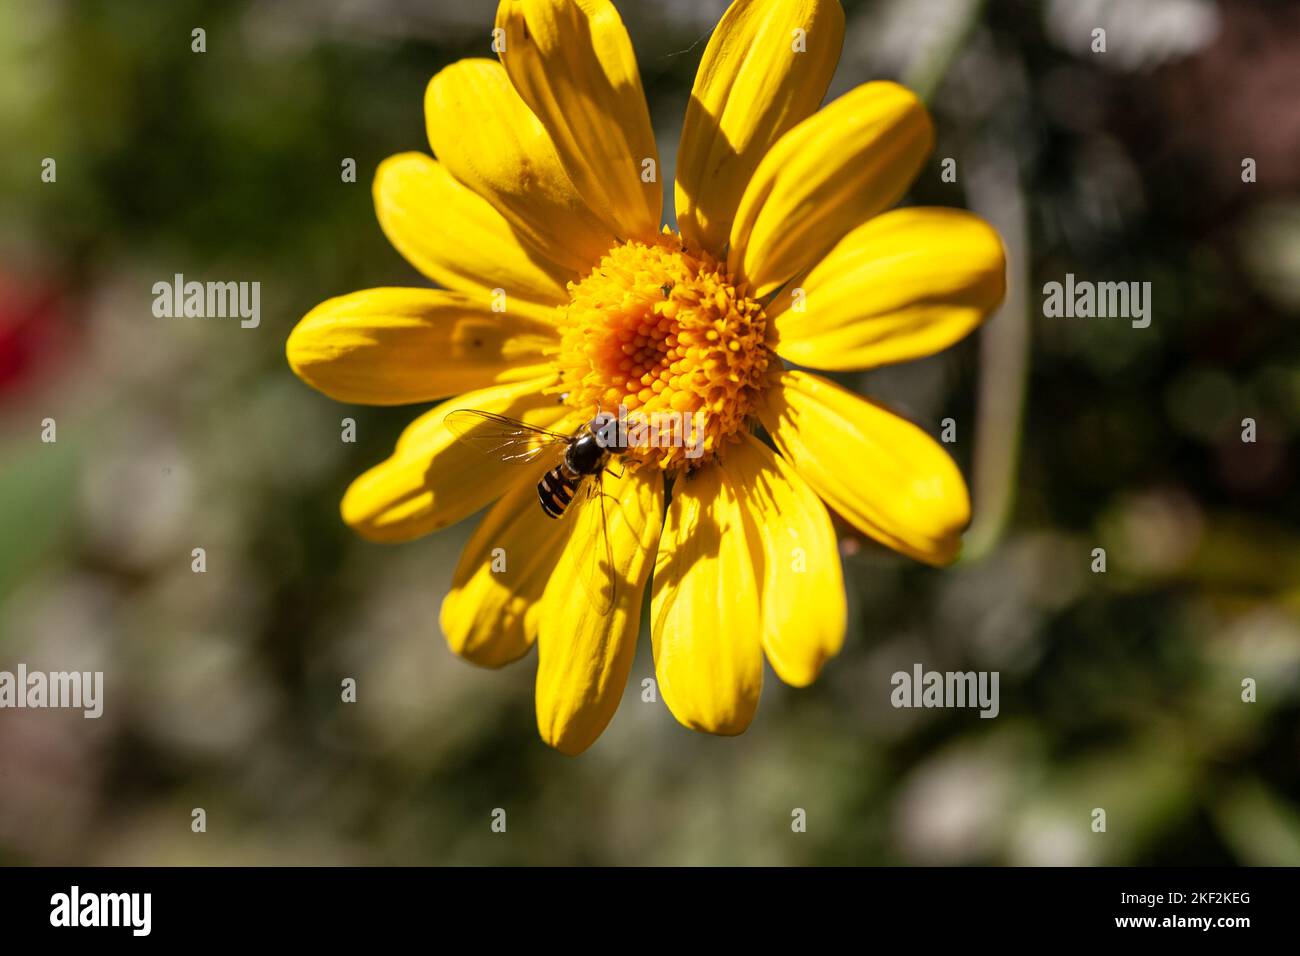 A cheerful daisy flower found in both gardens and in the wild Stock Photo